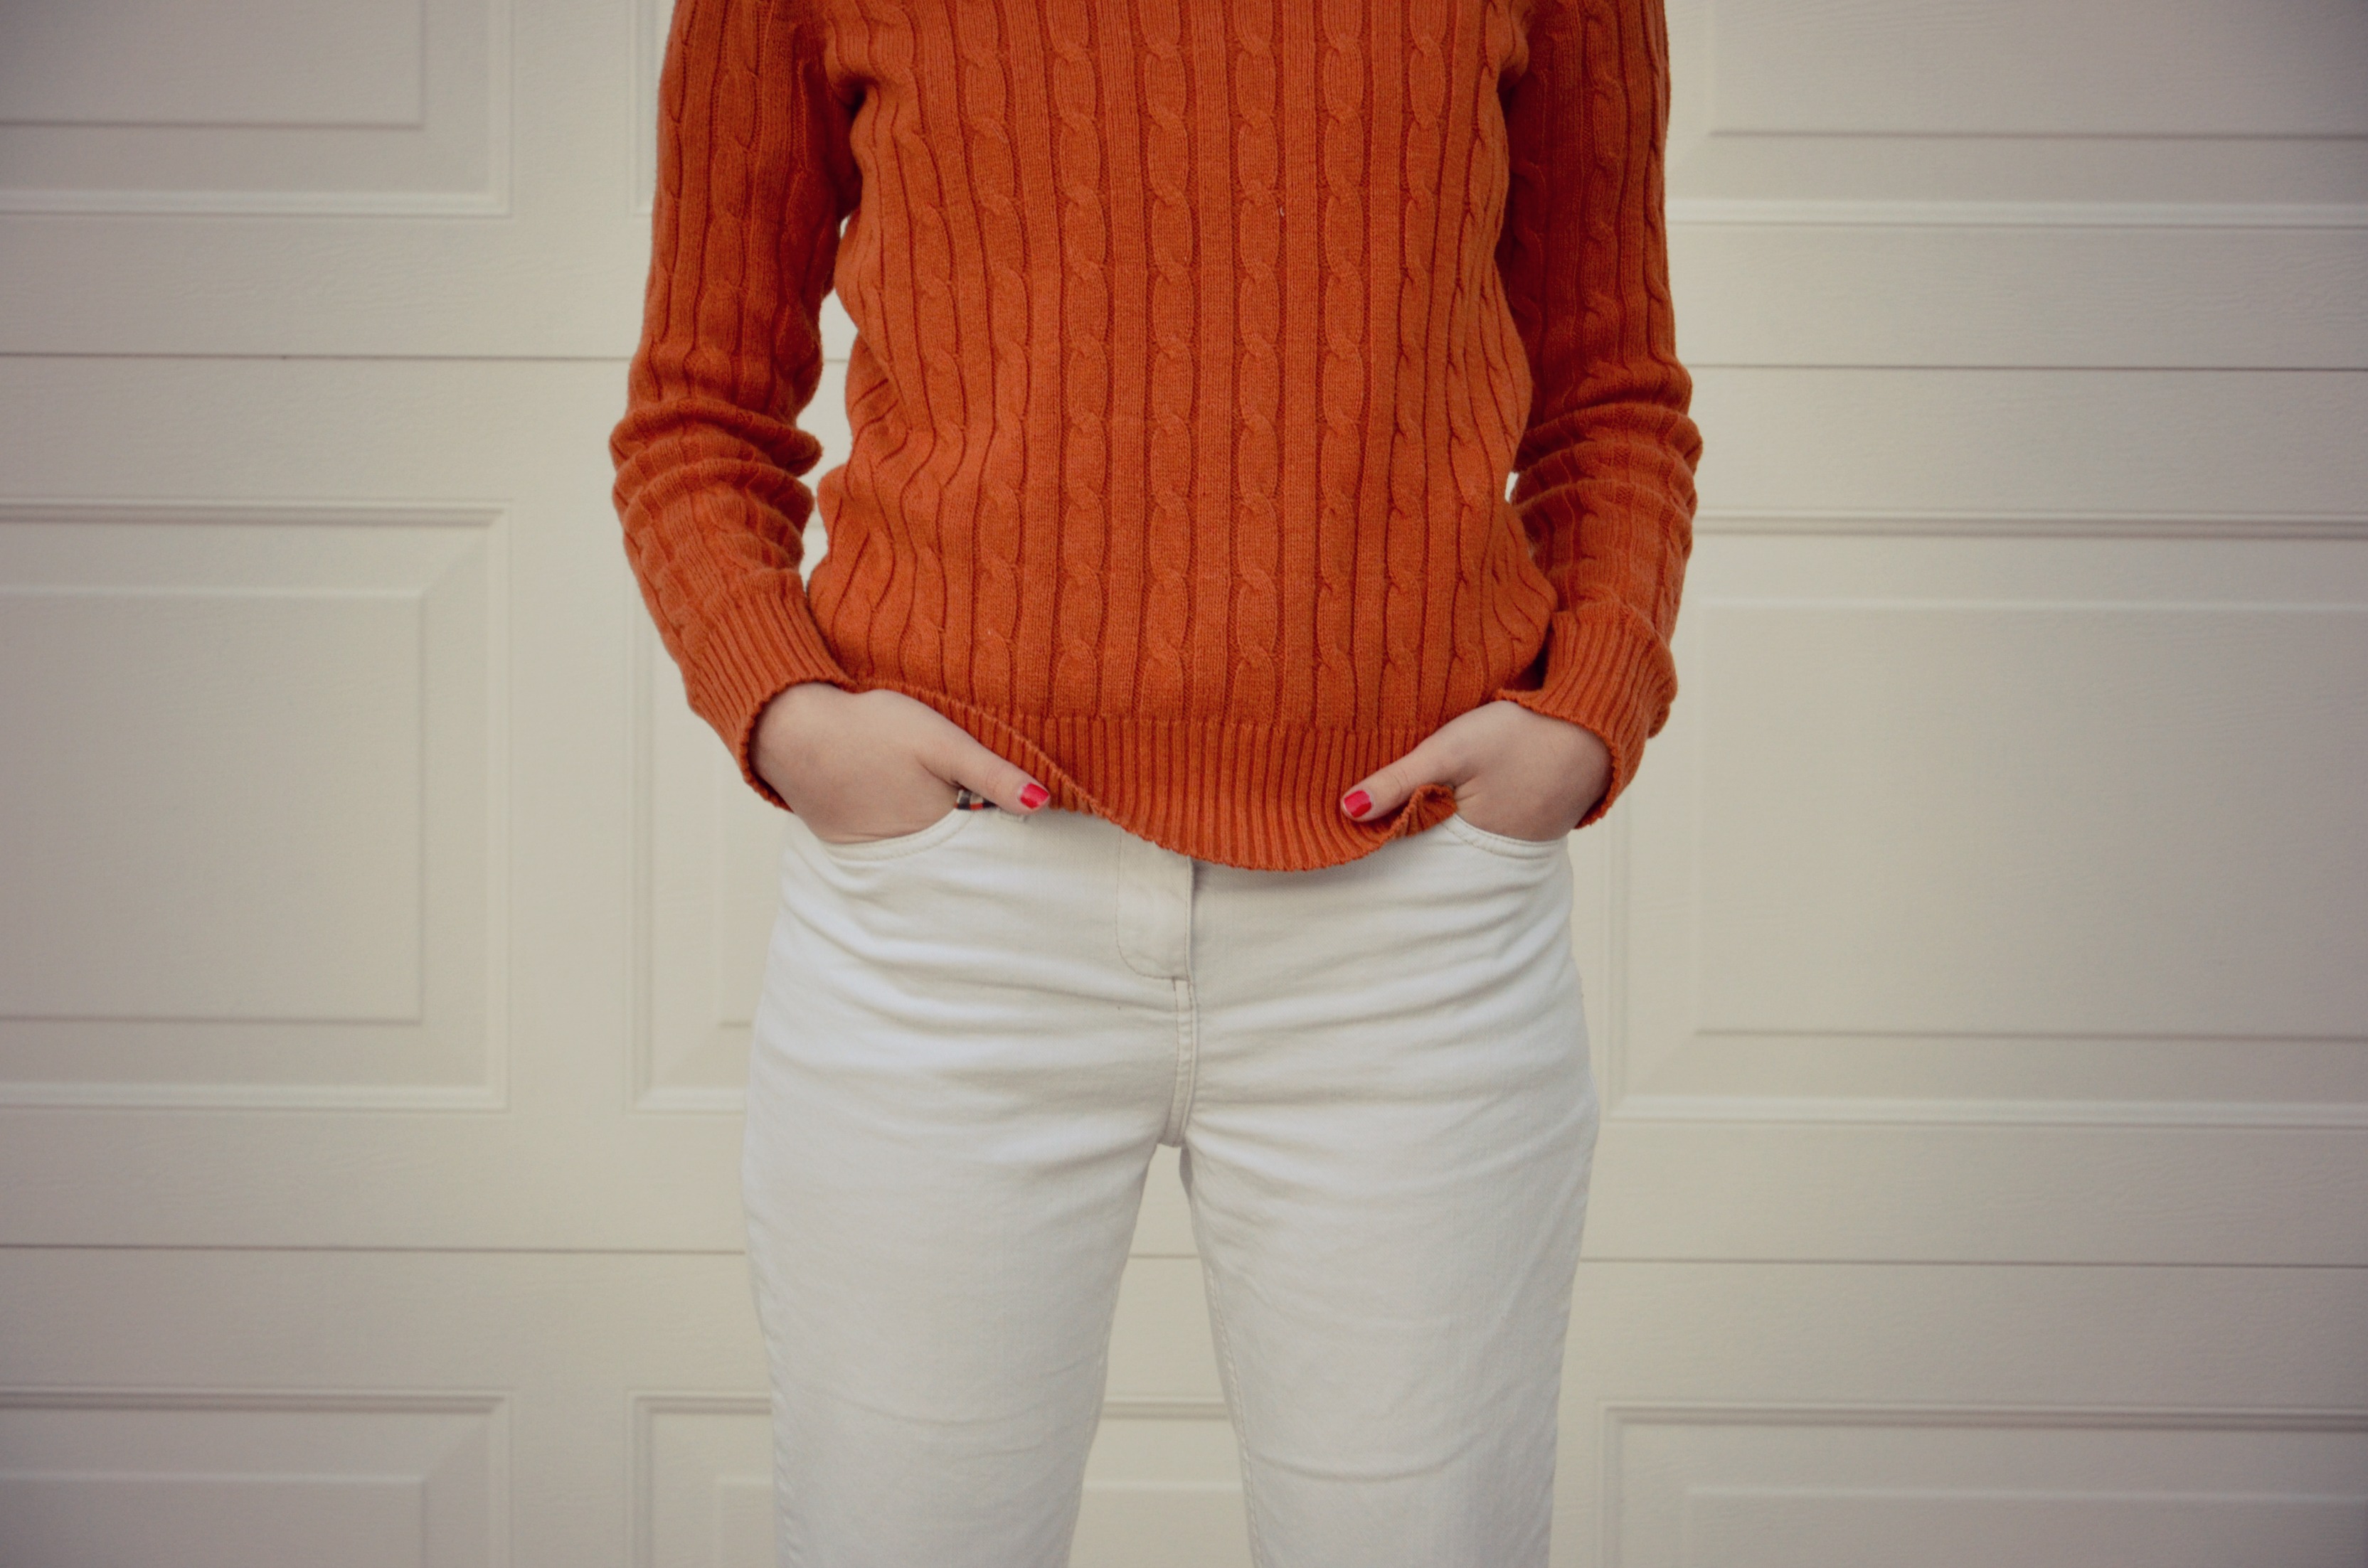 What I Wore - Time is Love ❘ Modest ❘ Fashion ❘ Fall ❘ Wearing White Jeans in the Fall ❘ Boden